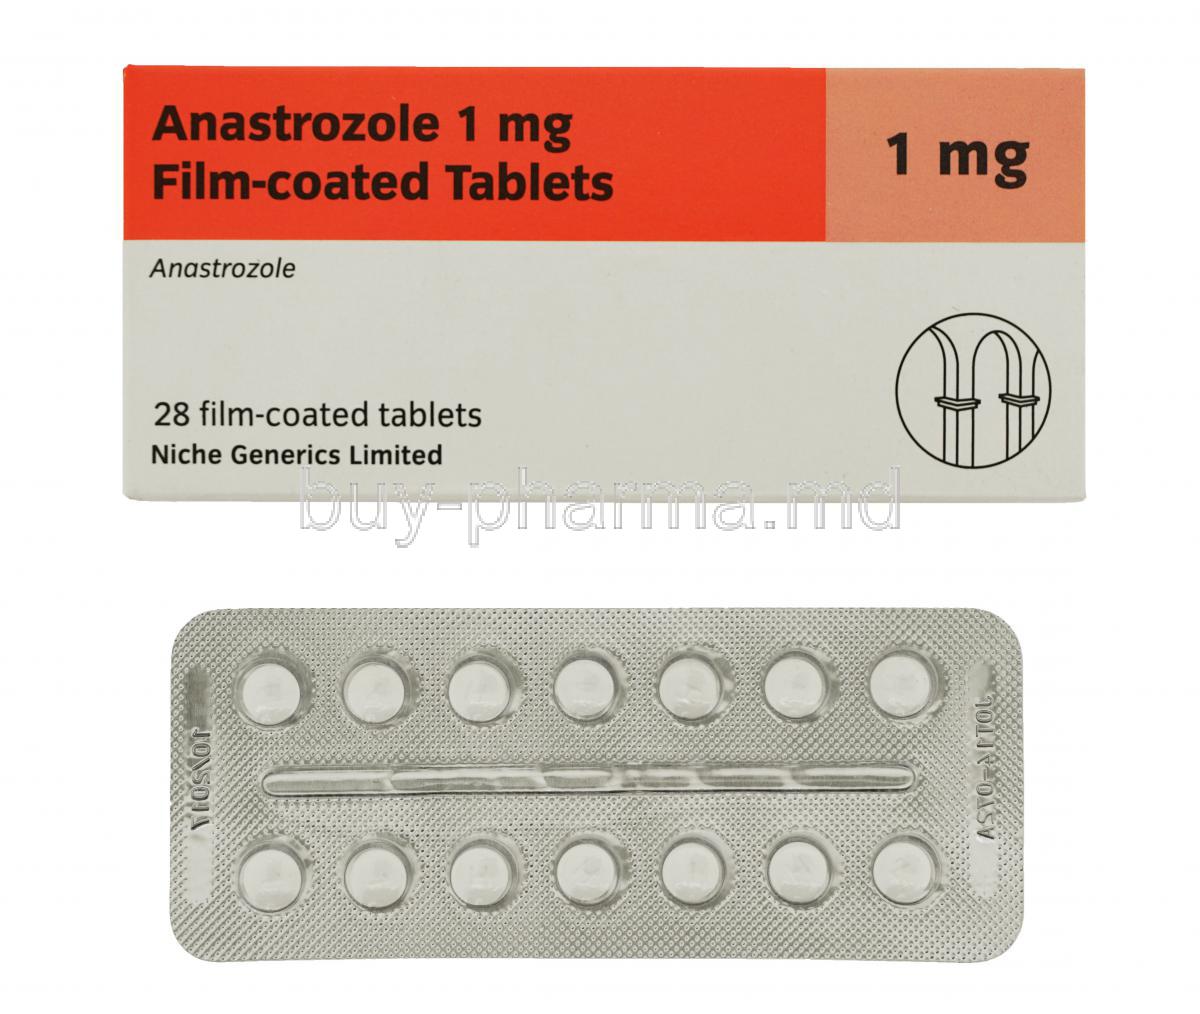 Generic Arimidex, Anastrozole 1mg 28 tabs packaging box and blister